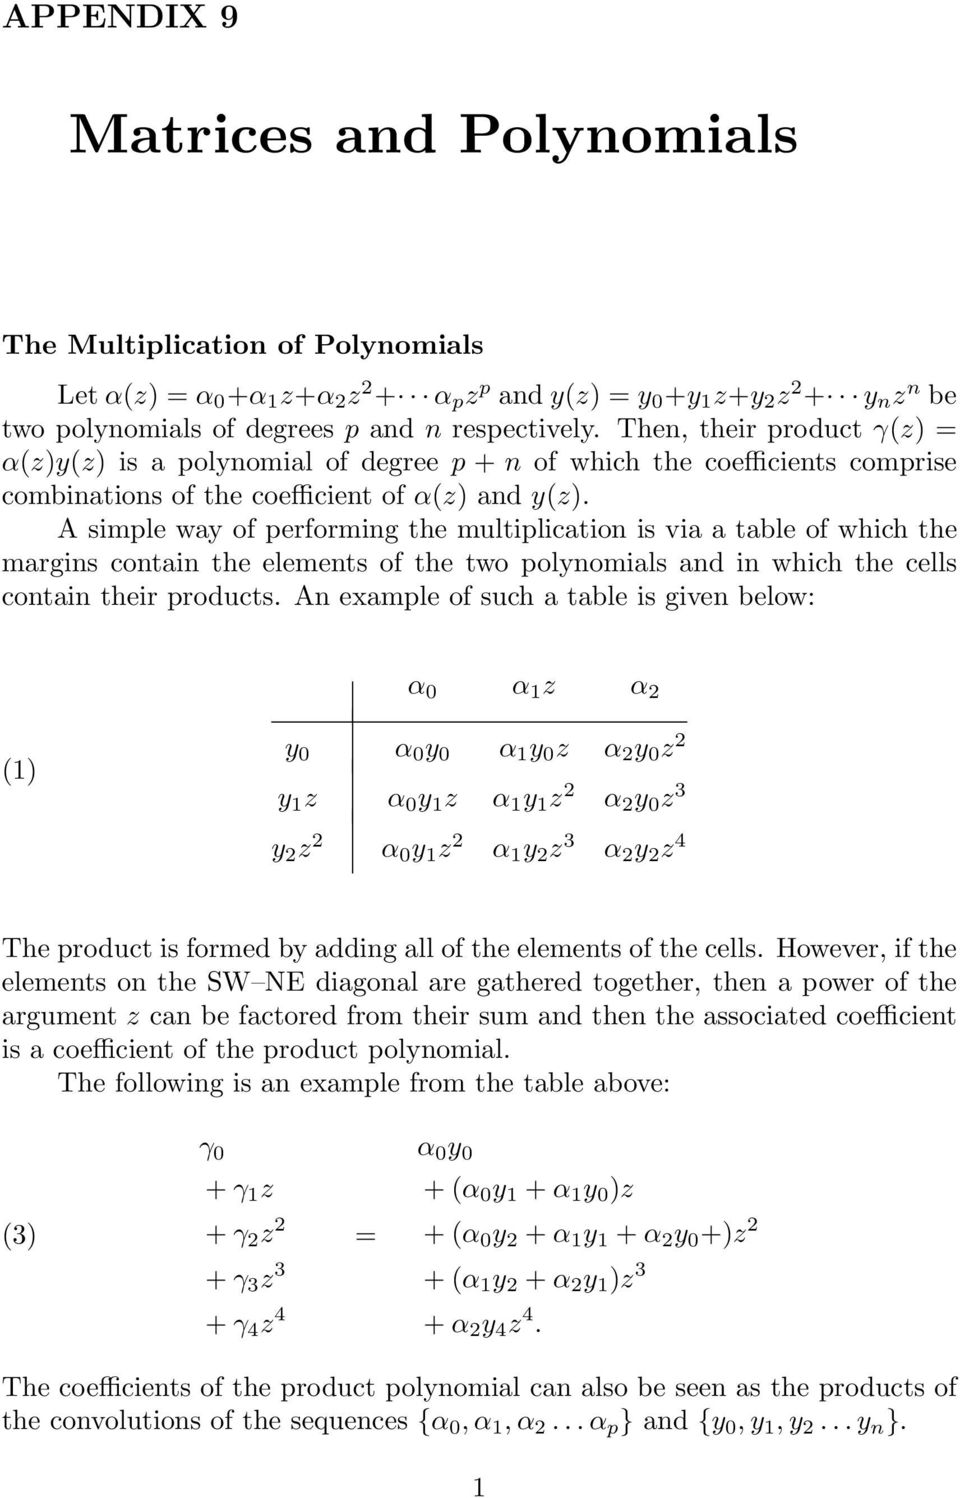 A simple way of performing the multiplication is via a table of which the margins contain the elements of the two polynomials and in which the cells contain their products.